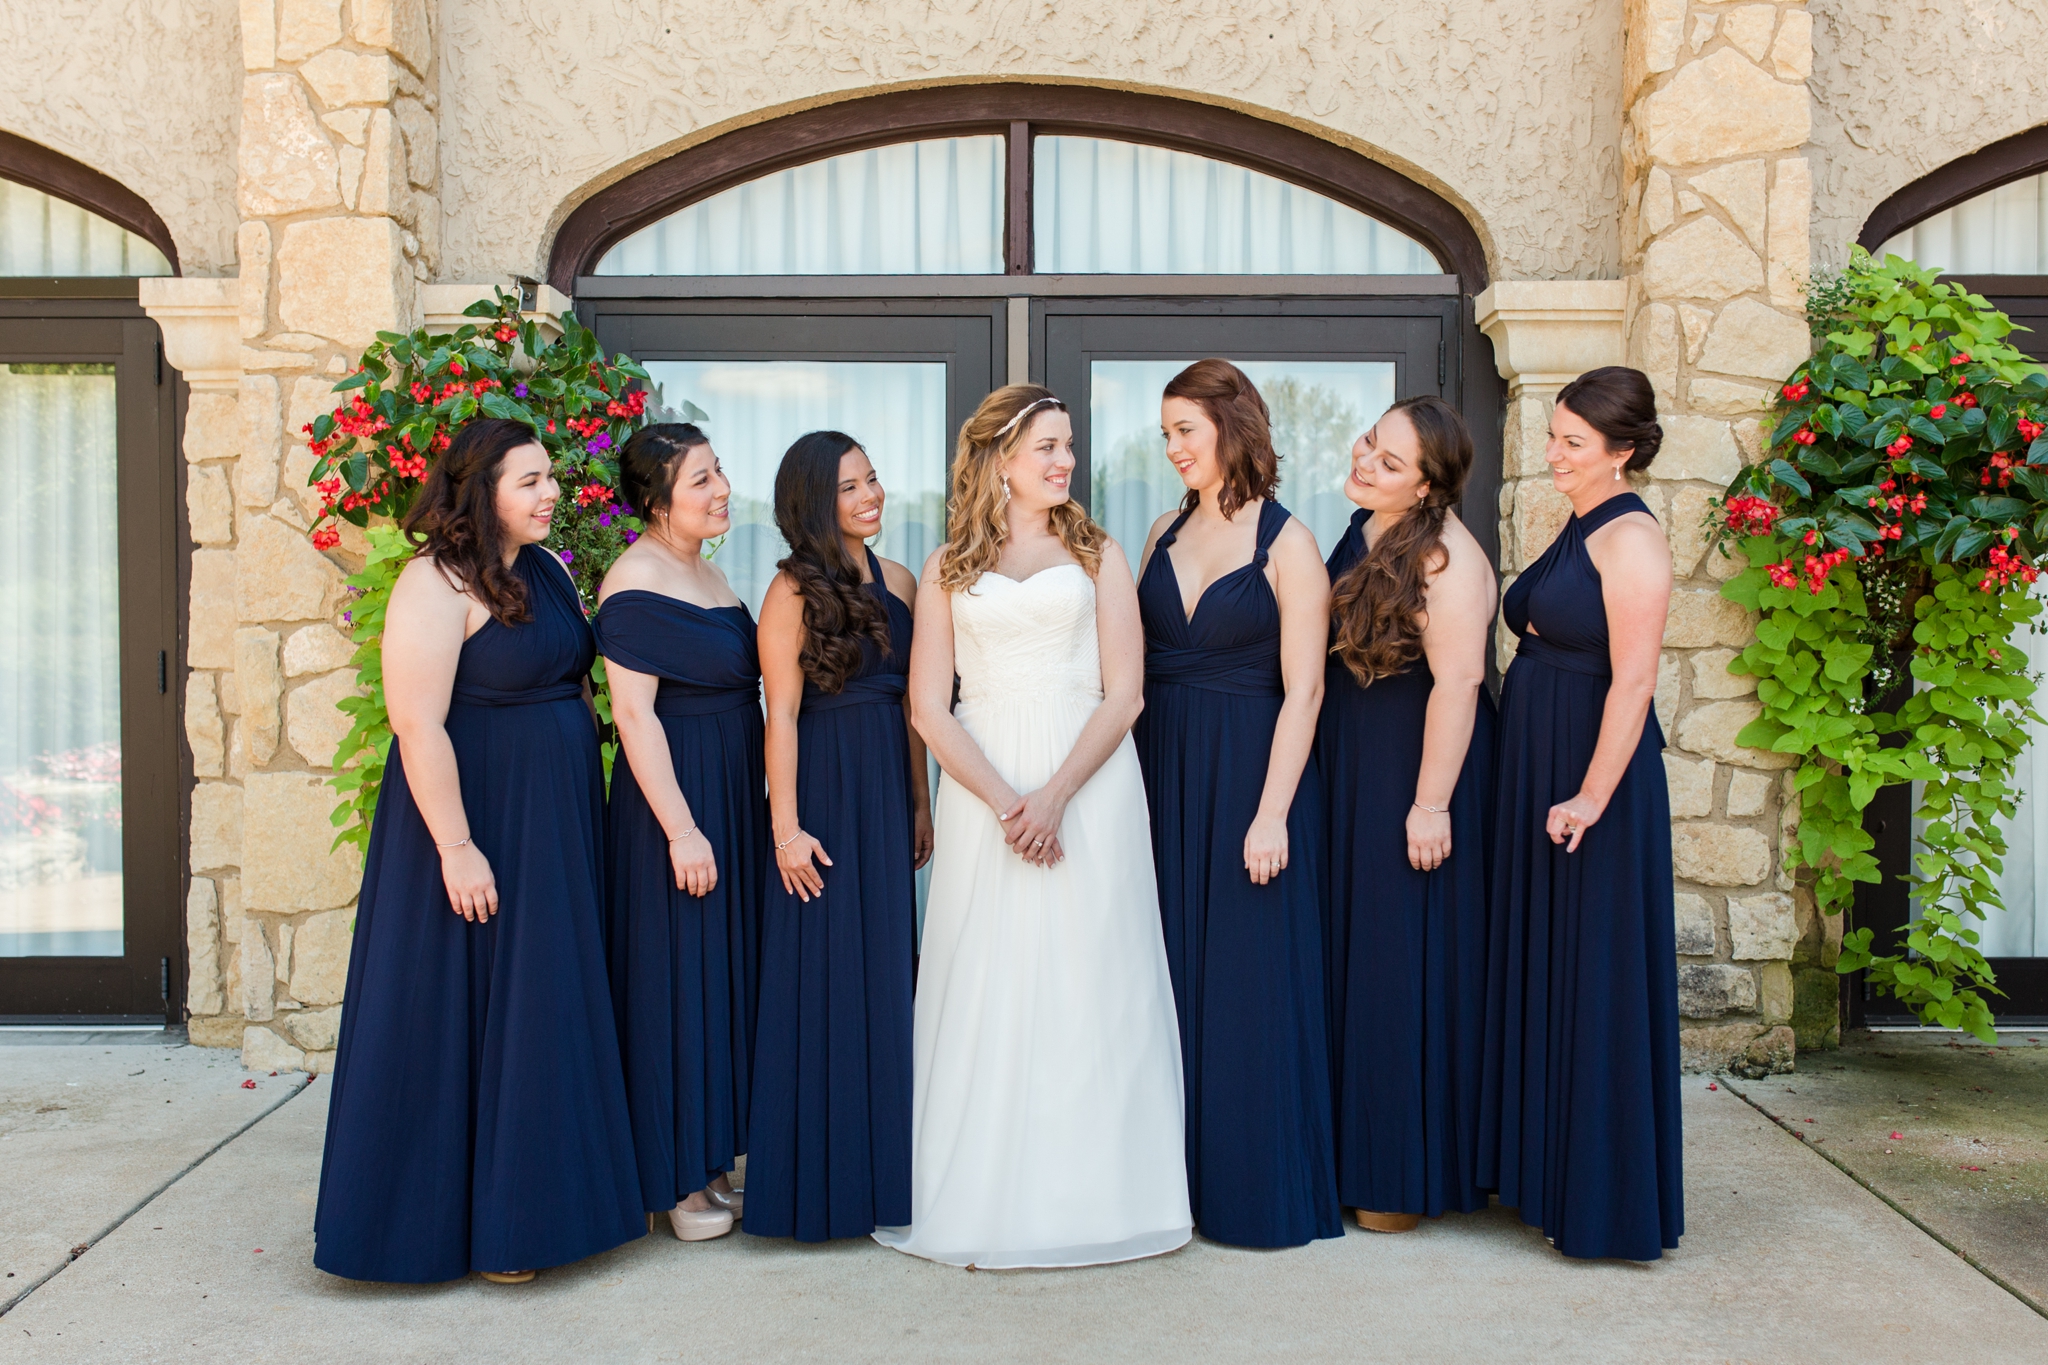 Navy and Cream Wedding at New Town at St. Charles, MO by Dawn Elizabeth Studios